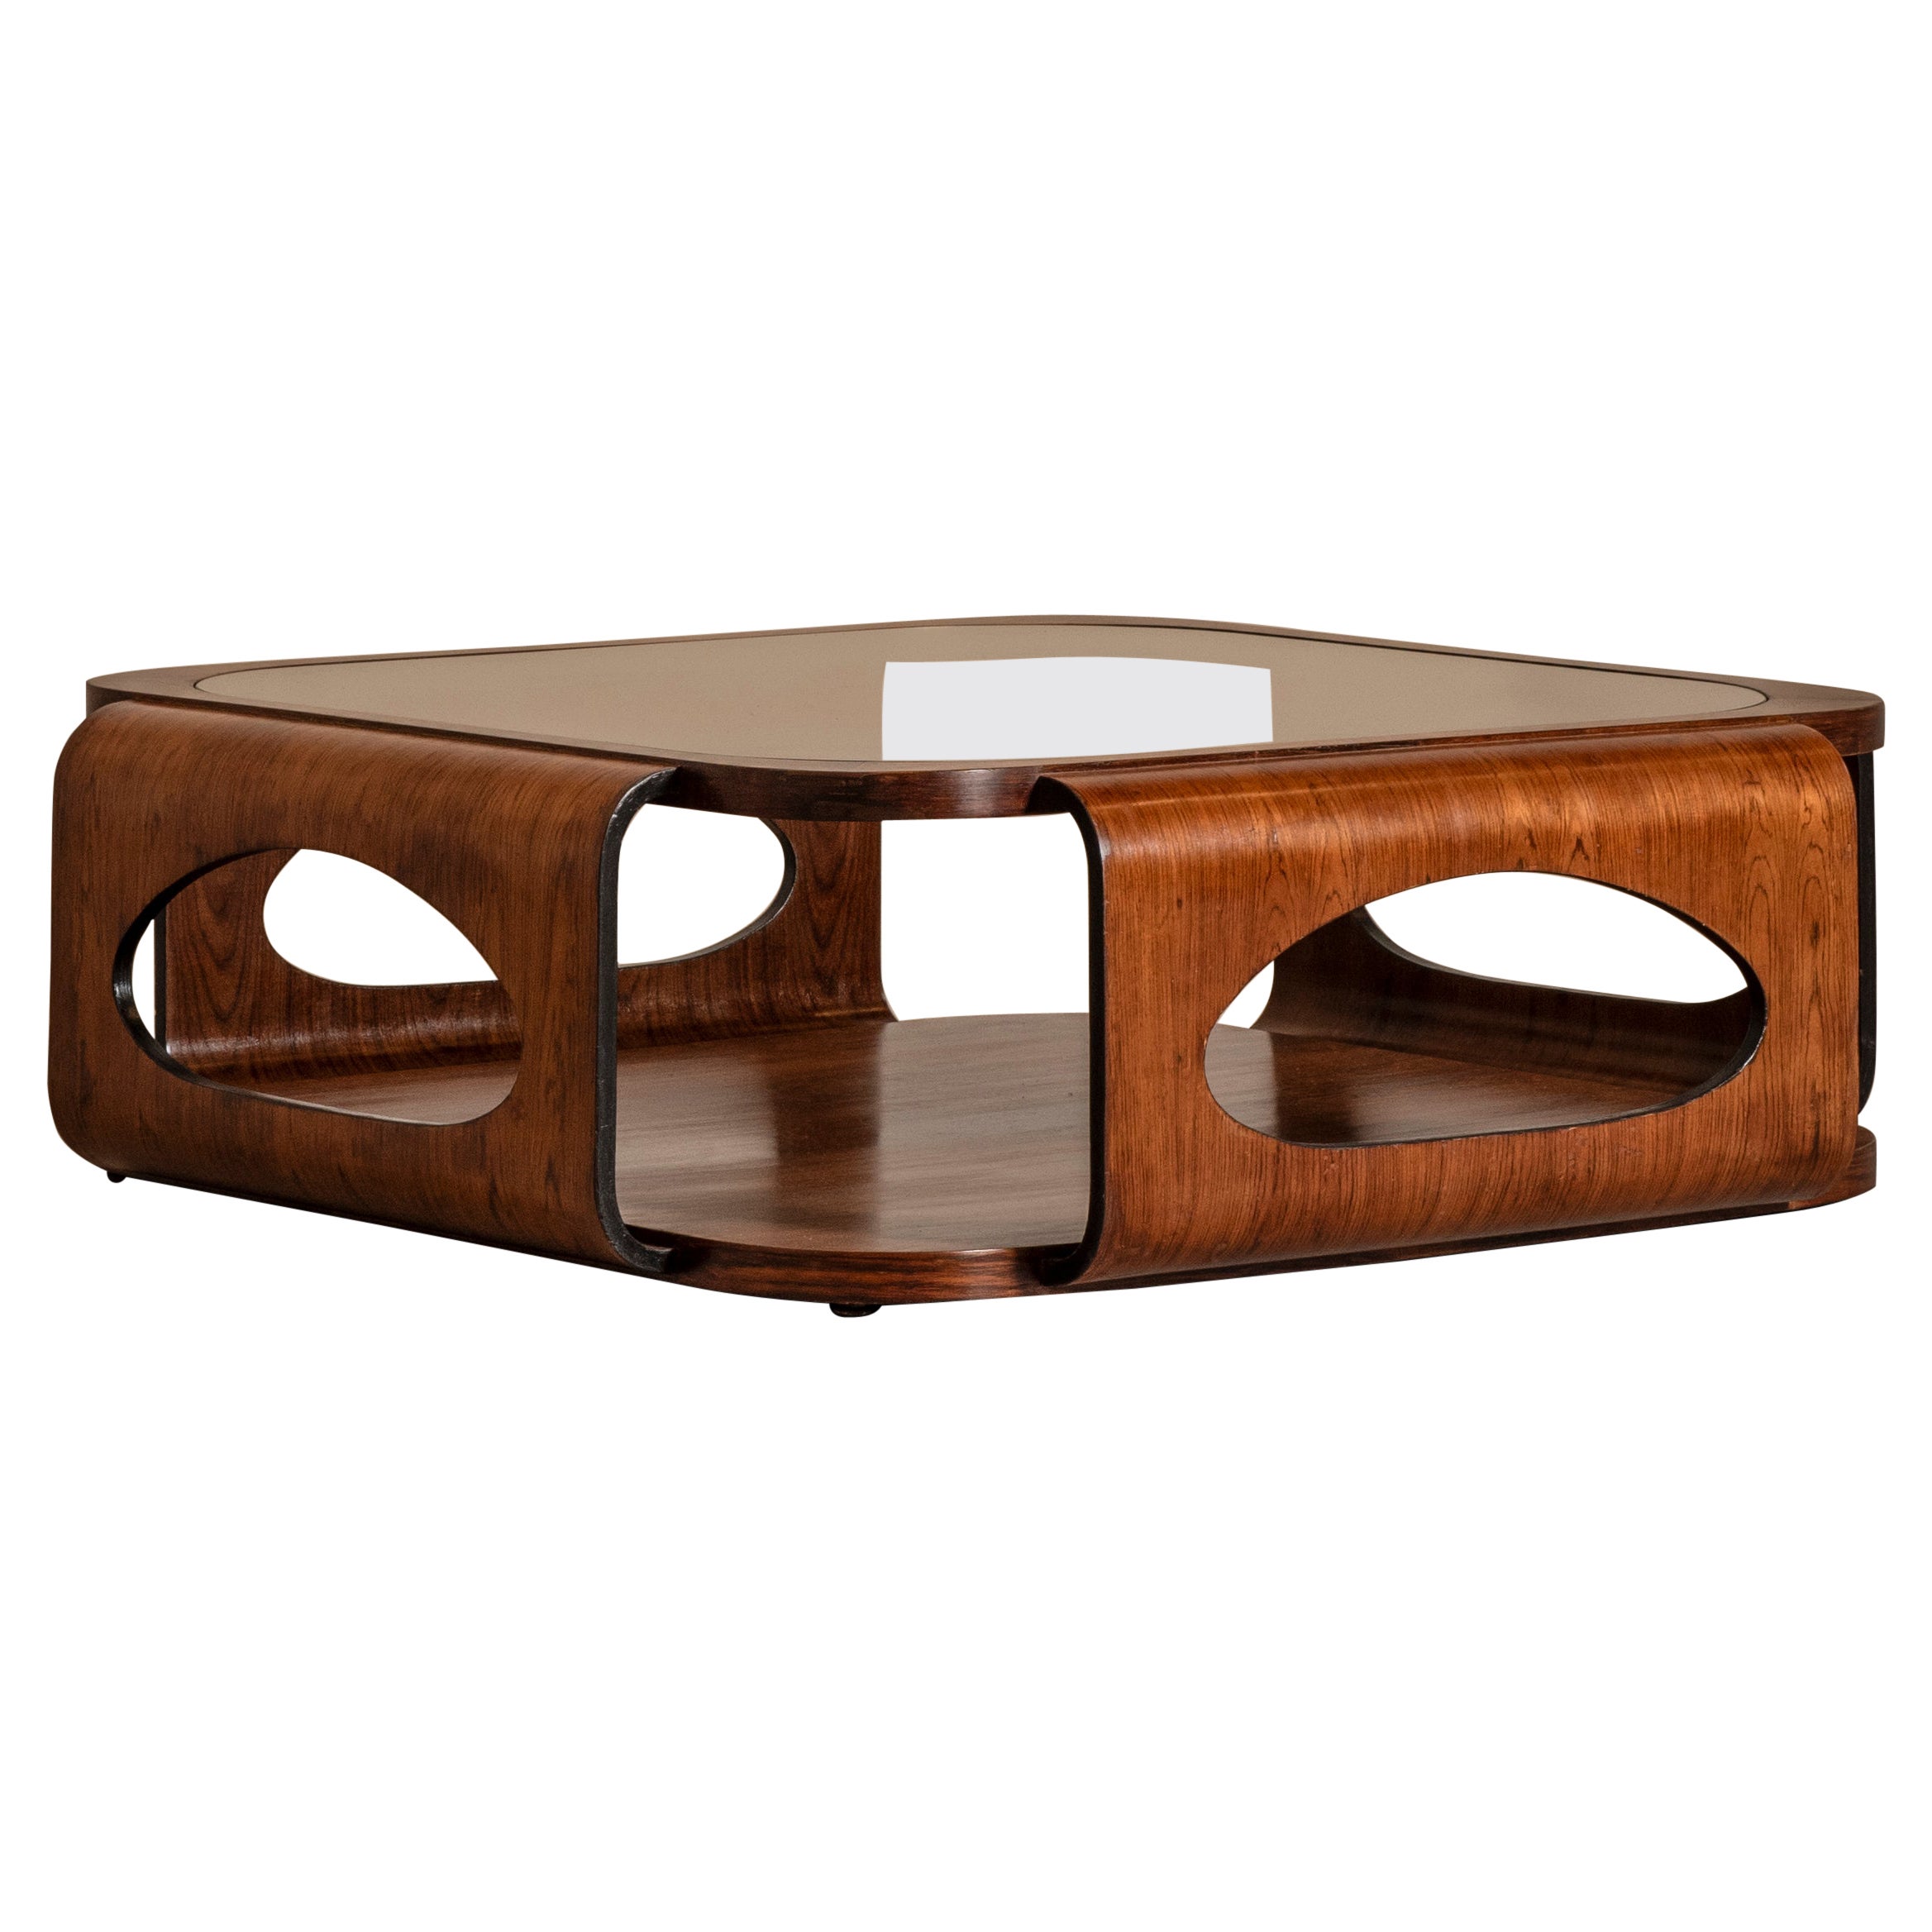 Center Table in Wood and Glass, by Móveis Bertomeu, Mid-Century Modern Design For Sale